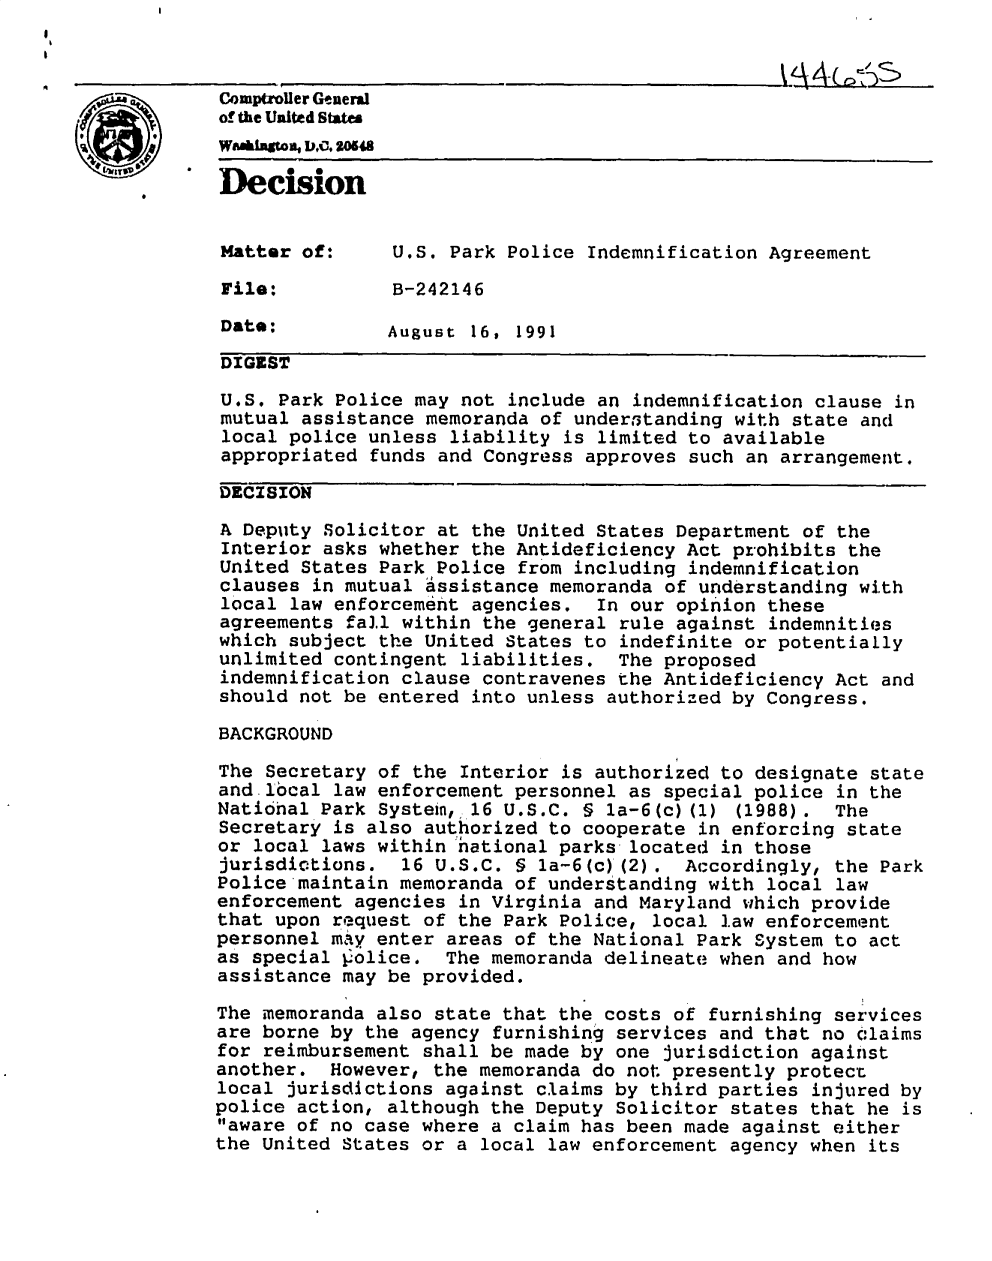 handle is hein.gao/gaobadnxz0001 and id is 1 raw text is: I


                Comptroiler Genemil
  a    t
  S
      .of the Unitd Shtes

                Decision



                Matter of:      U.S. Park Police Indemnification Agreement

                File:           B-242146

                Date;          August 16, 1991
                DIGEST

                U.S. Park Police may not include an indemnification clause in
                mutual assistance memoranda of underftanding with state and
                local police unless liability is limited to available
                appropriated funds and Congress approves such an arrangement.

                DECISION

                A Deputy Solicitor at the United States Department of the
                Interior asks whether the Antideficiency Act prohibits the
                United States Park Police from including indemnification
                clauses in mutual assistance memoranda of understanding with
                local law enforcement agencies. In our opinion these
                agreements fall within the general rule against indemnities
                which subject the United States to indefinite or potentially
                unlimited contingent liabilities. The proposed
                indemnification clause contravenes the Antideficiency Act and
                should not be entered into unless authorized by Congress.

                BACKGROUND

                The Secretary of the Interior is authorized to designate state
                and local law enforcement personnel as special police in the
                Natinal Park Systein, 16 U.S.C. § la-6(c)(1) (1988). The
                Secretary is also authorized to cooperate in enforcing state
                or local laws within hational parks located in those
                jurisdictions. 16 U.S.C. § 1a-6(c)'(2). Accordingly, the Park
                Police maintain memoranda of understanding with local law
                enforcement agencies in Virginia and Maryland which provide
                that upon request of the Park Police, local law enforcement
                personnel mAy enter areas of the National Park System to act
                as special police. The memoranda delineate when and how
                assistance may be provided.

                The memoranda also state that the costs of furnishing services
                are borne by the agency furnishing services and that no claims
                for reimbursement shall be made by one jurisdiction against
                another. However, the memoranda do not presently protect
                local jurisdictions against claims by third parties injured by
                police action, although the Deputy Solicitor states that he is
                aware of no case where a claim has been made against either
                the United States or a local law enforcement agency when its


